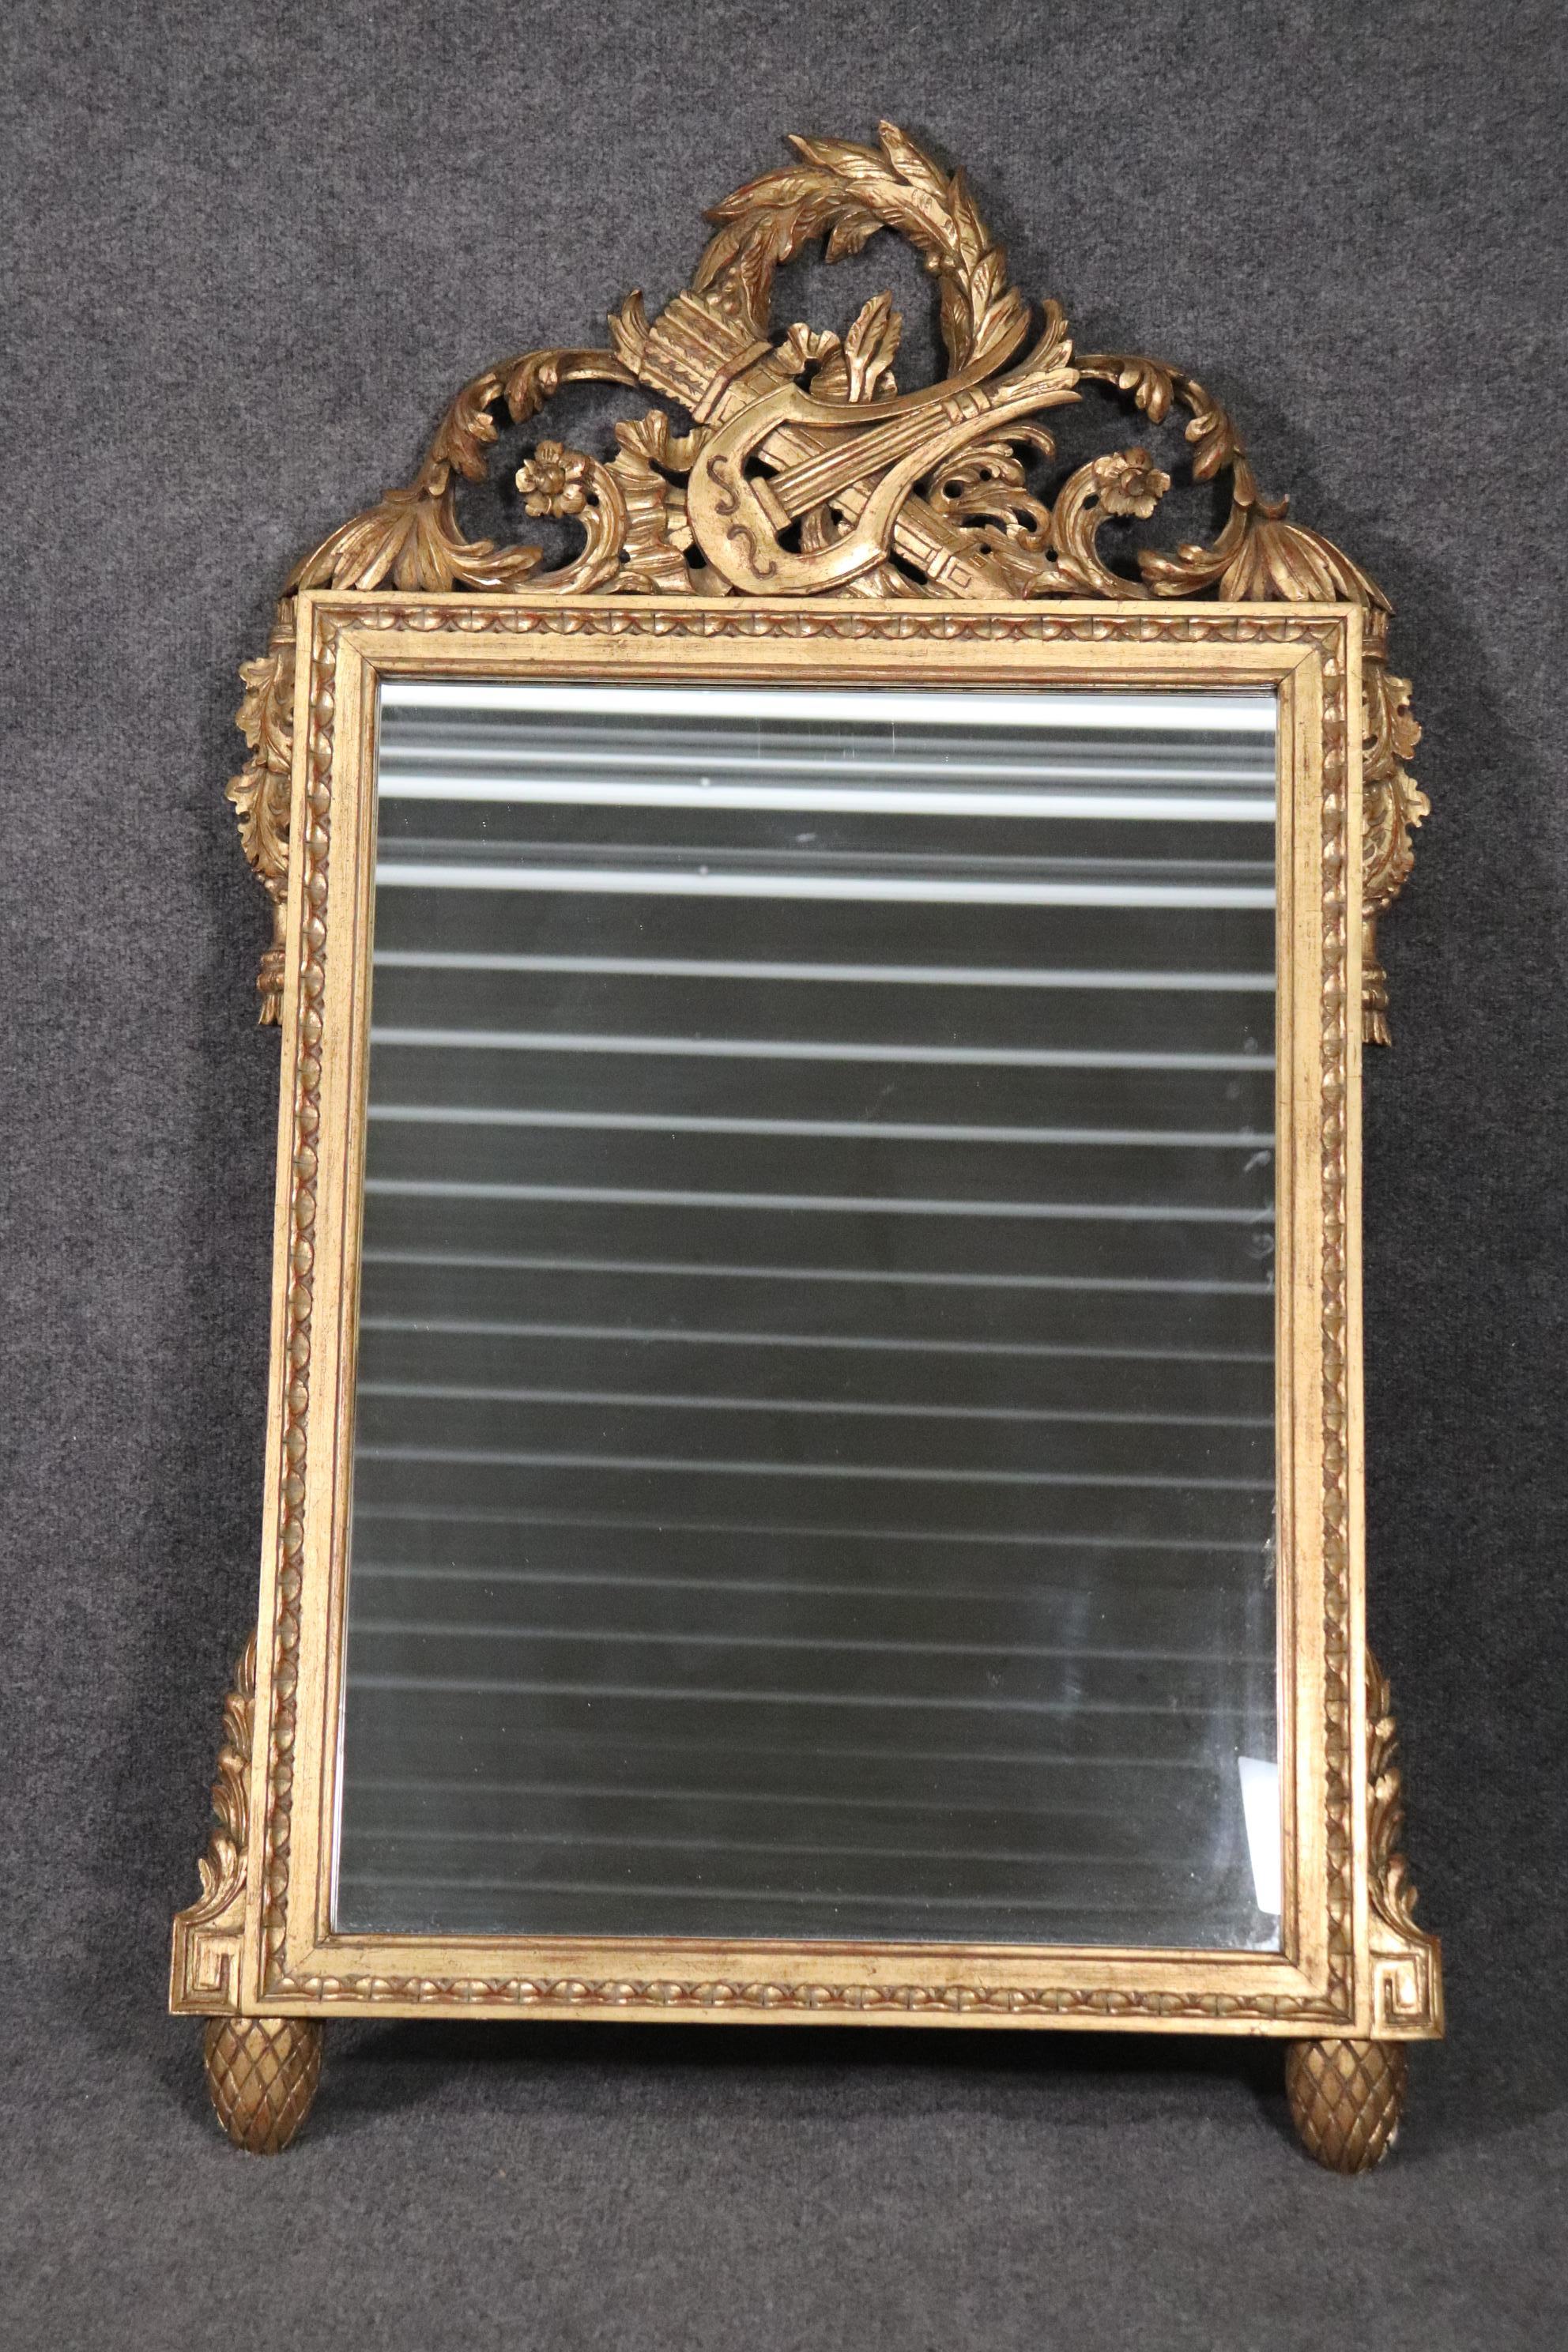 This is a beautiful gilded mirror depicting a Lyre and quiver of arrows for the hunt. The mirror is absolutely classic and can work in any decor or design scheme. The mirror measures 52 tall x 31 wide x 1.5 inches thick. 